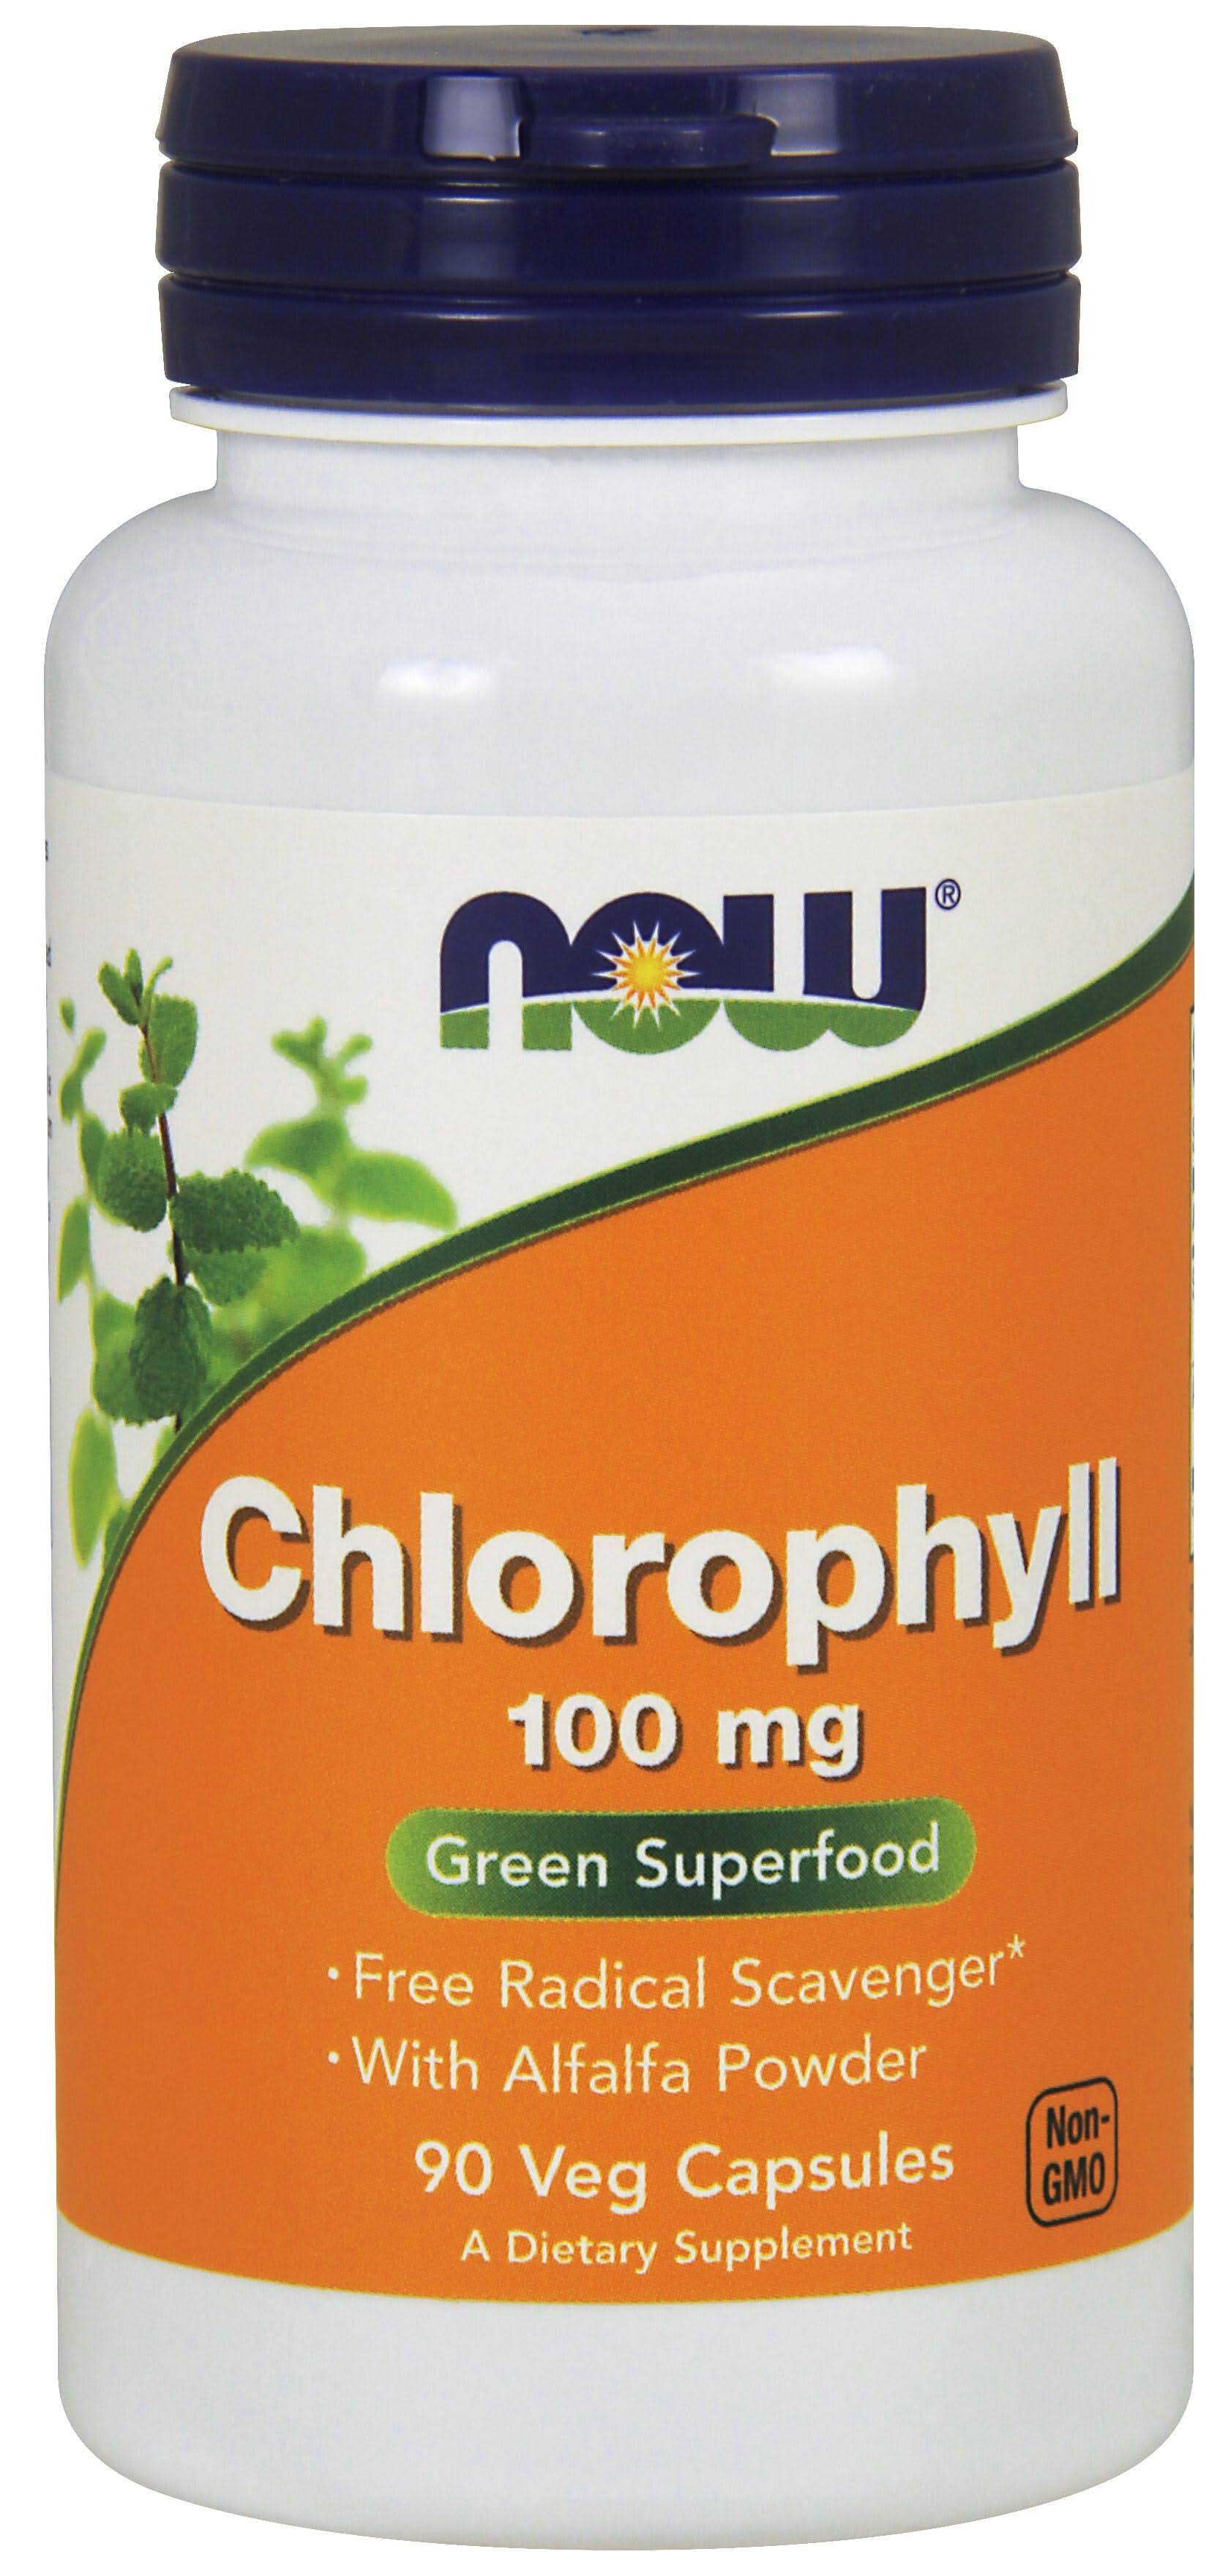 Now Foods Chlorophyll Supplement - 90 Capsules